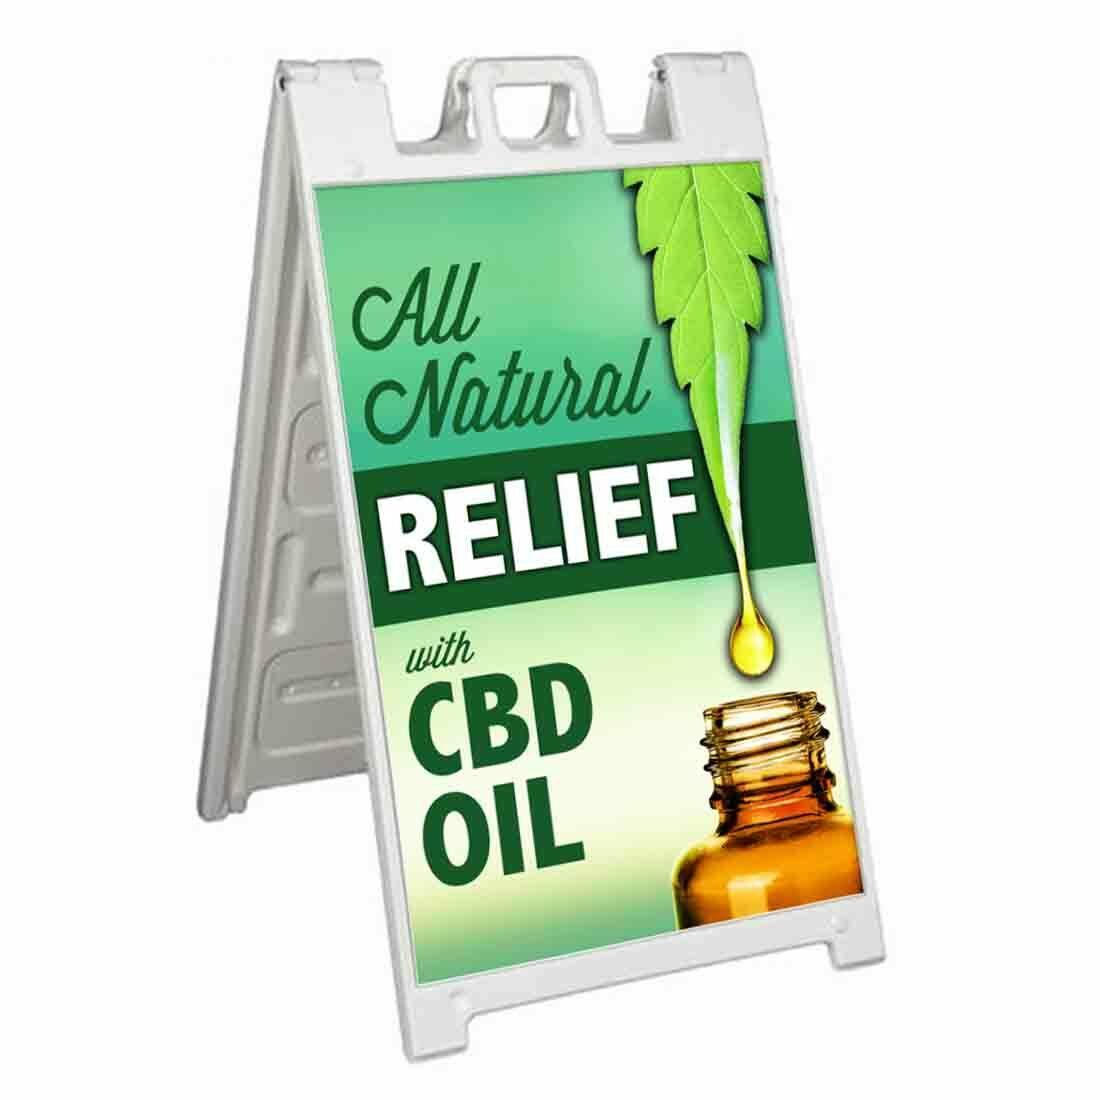 Primary image for ALL NATURAL RELIEF CBD OIL Signicade 24x36 Aframe Sidewalk Sign Banner Decal